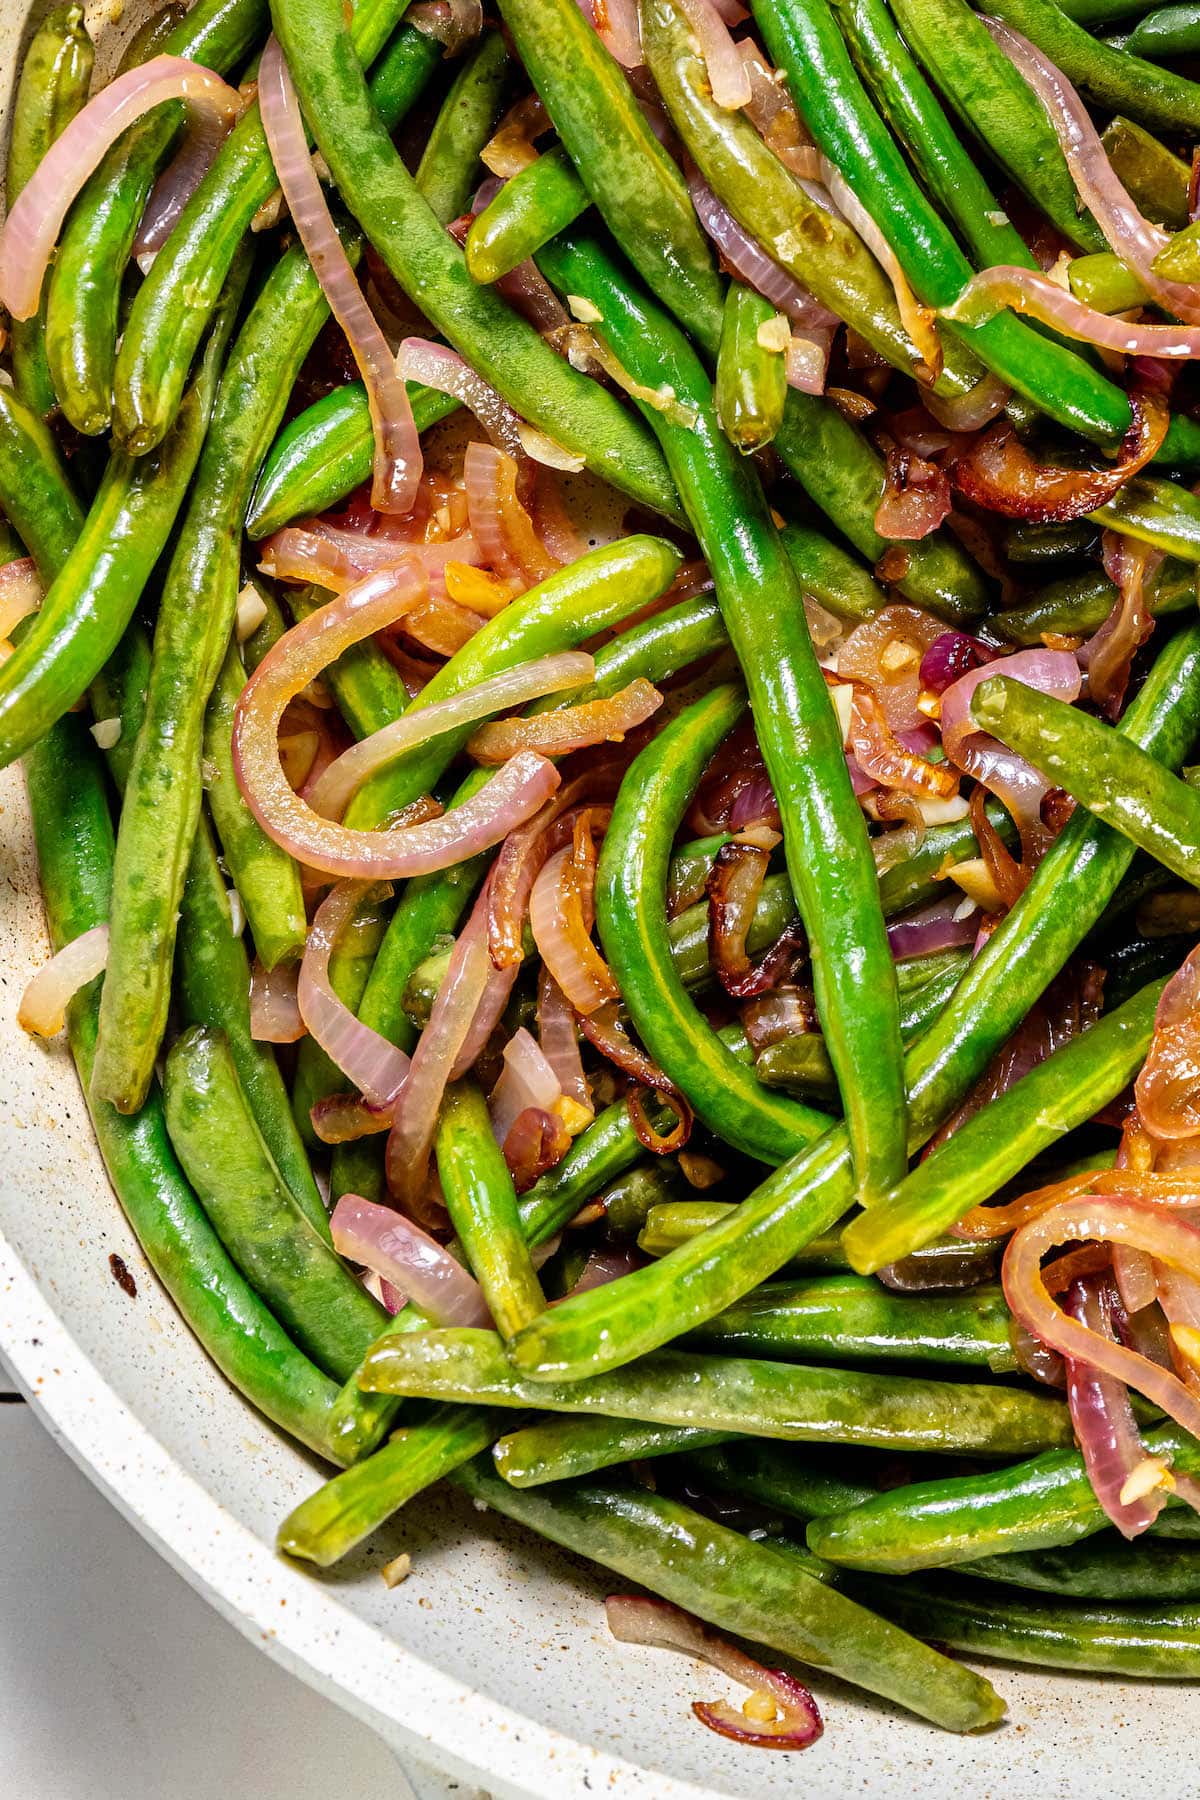 Sautéed green beans and red onion in a skillet.